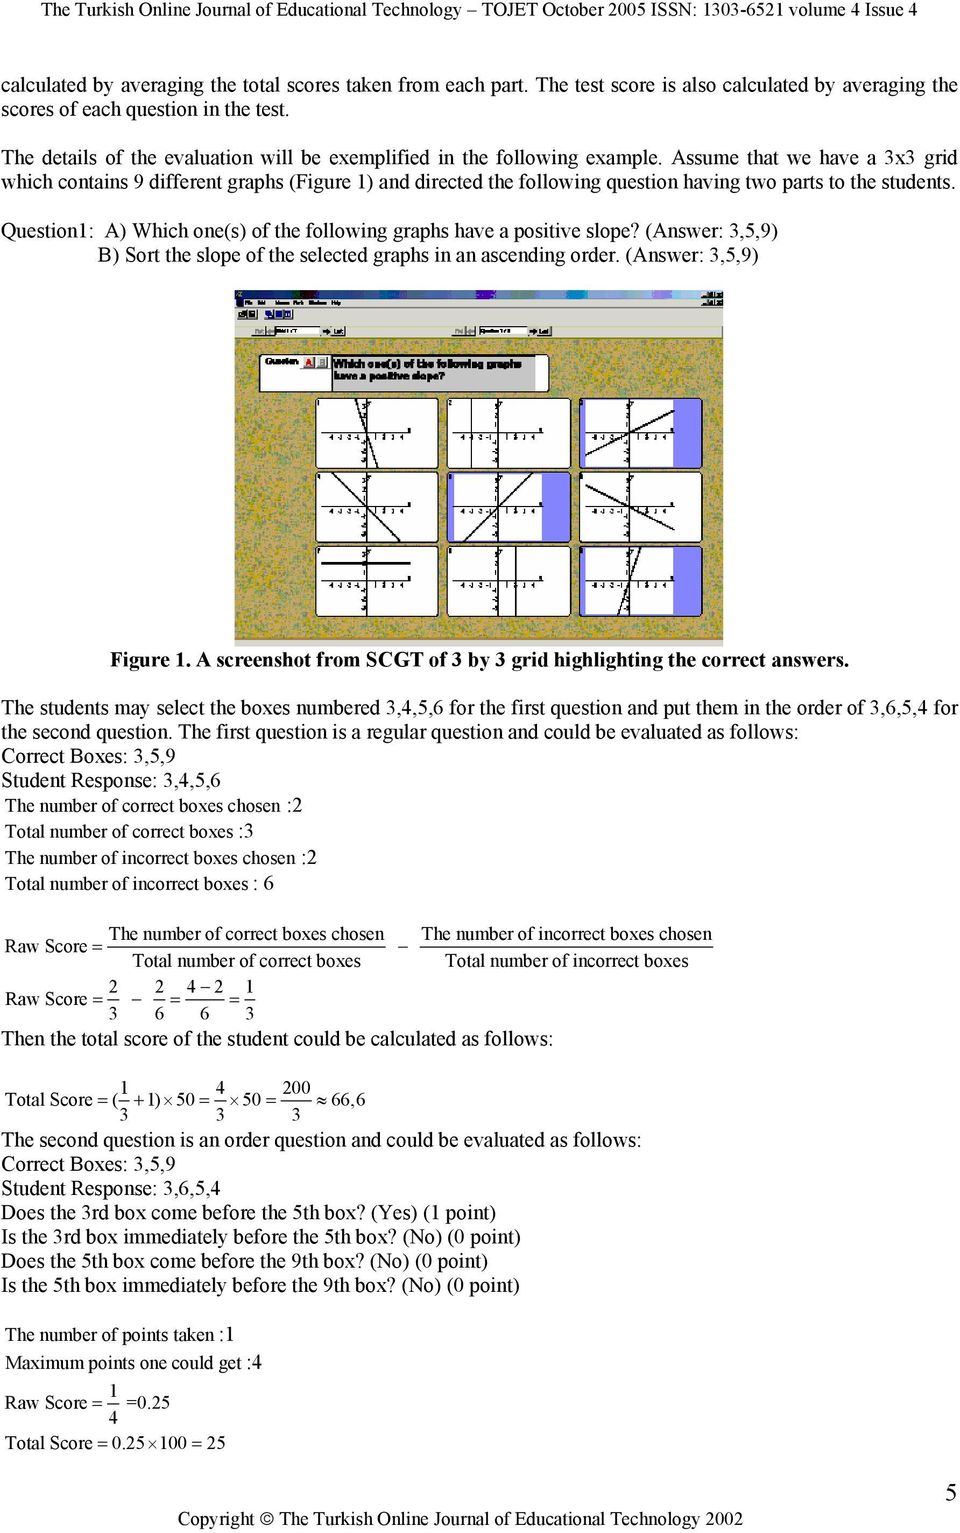 Assume that we have a 3x3 grid which contains 9 different graphs (Figure 1) and directed the following question having two parts to the students.